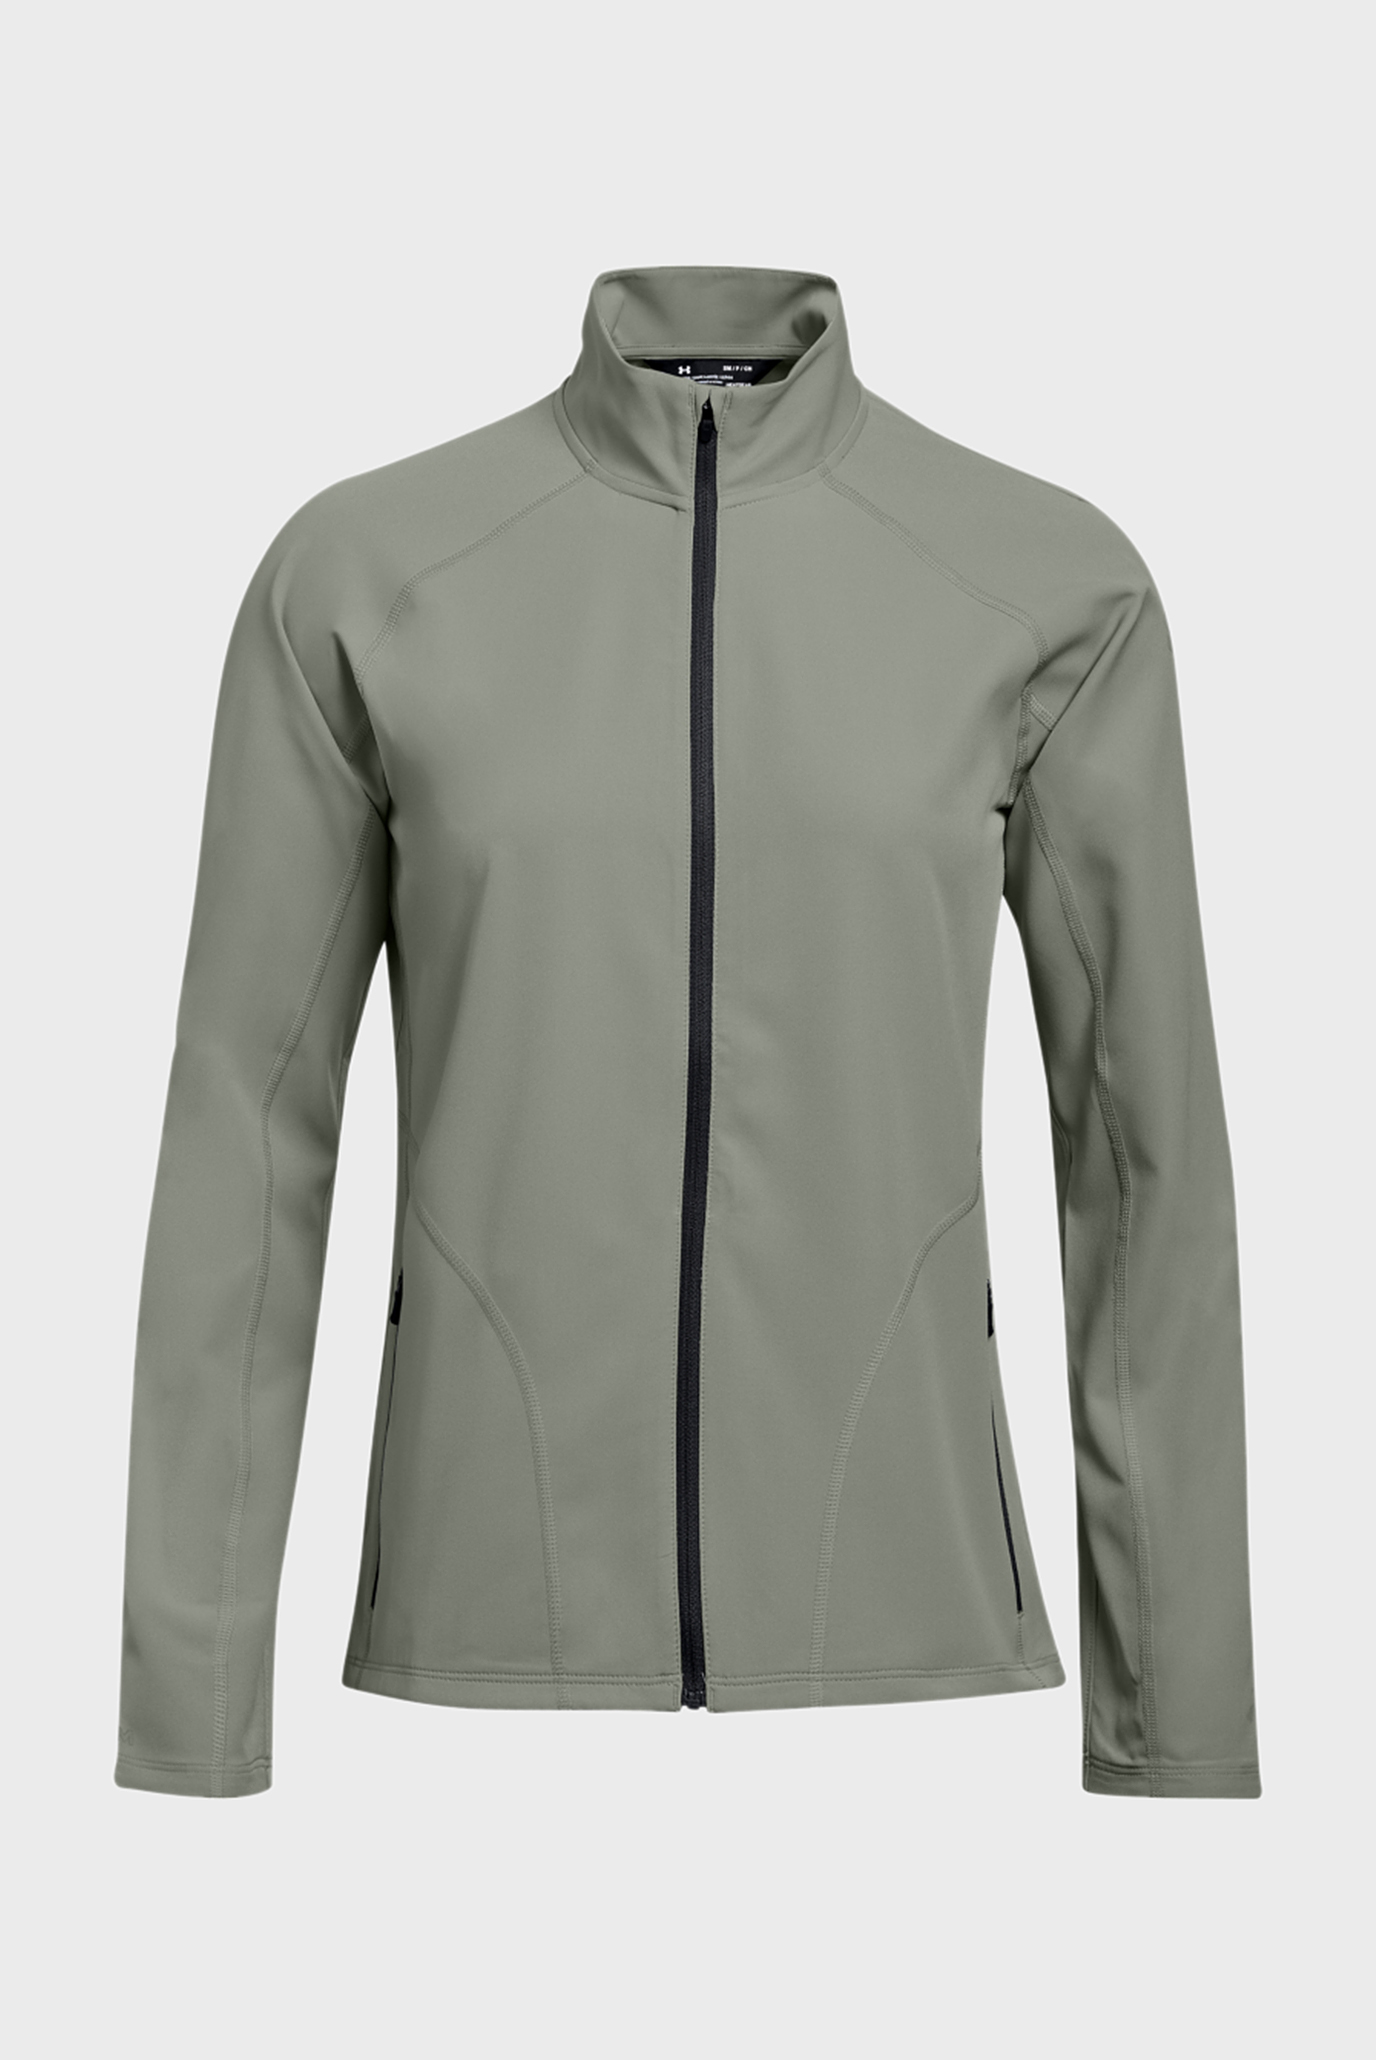 under armour out and back jacket